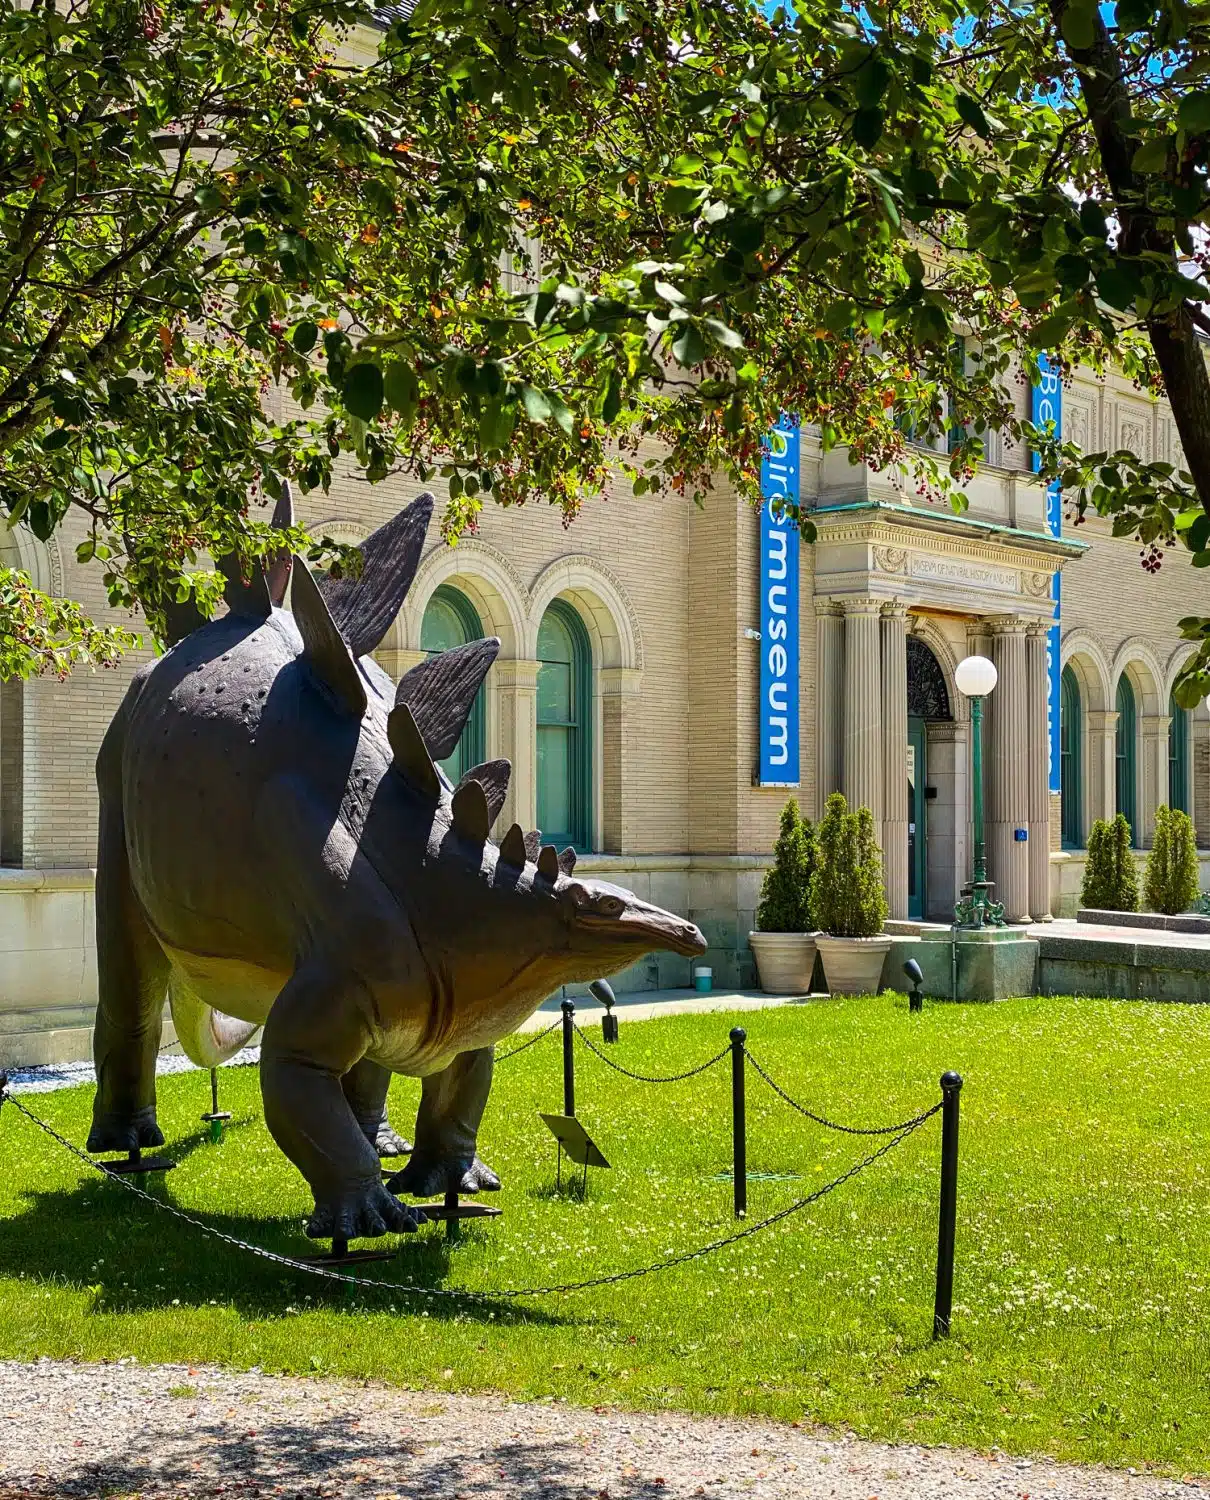 The dinosaur at the entrance of the Berkshire Museum.